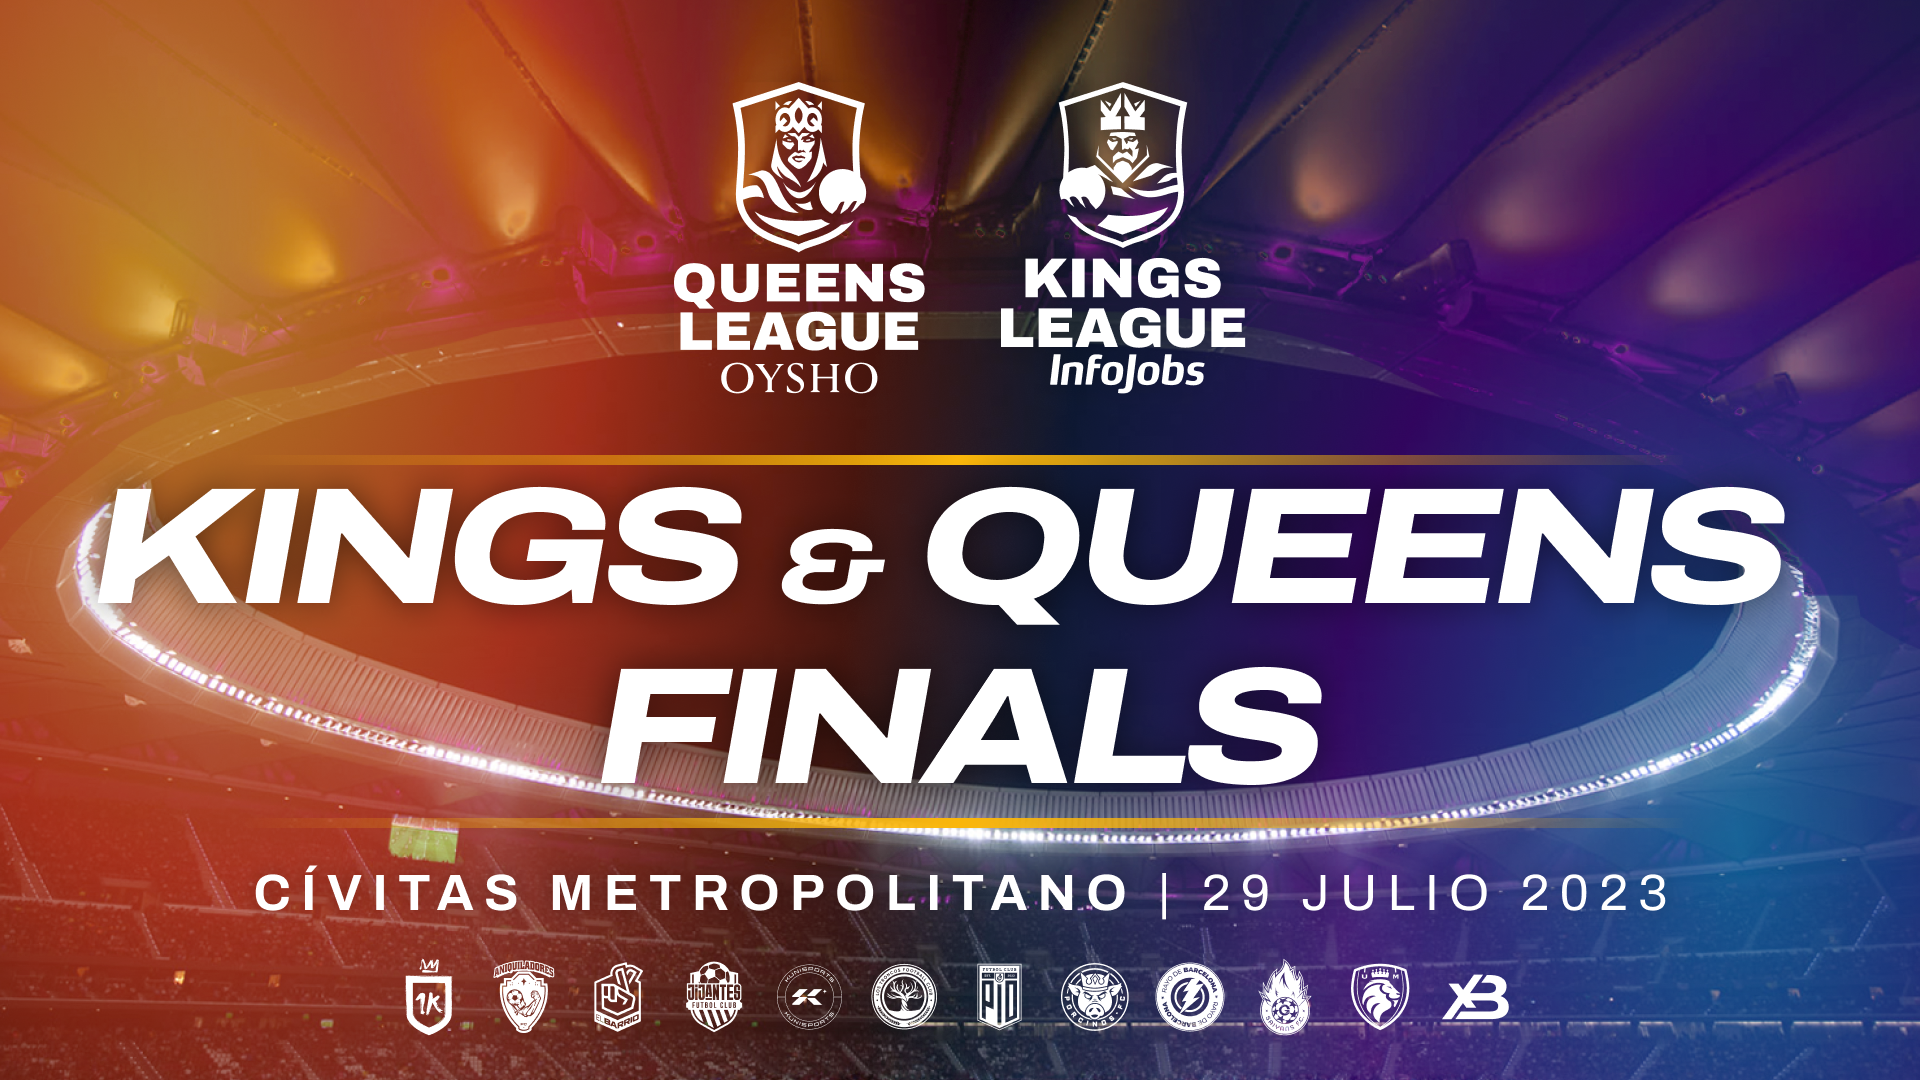 The Kings & Queens Finals arrive at the Cívitas Metropolitano on July 29